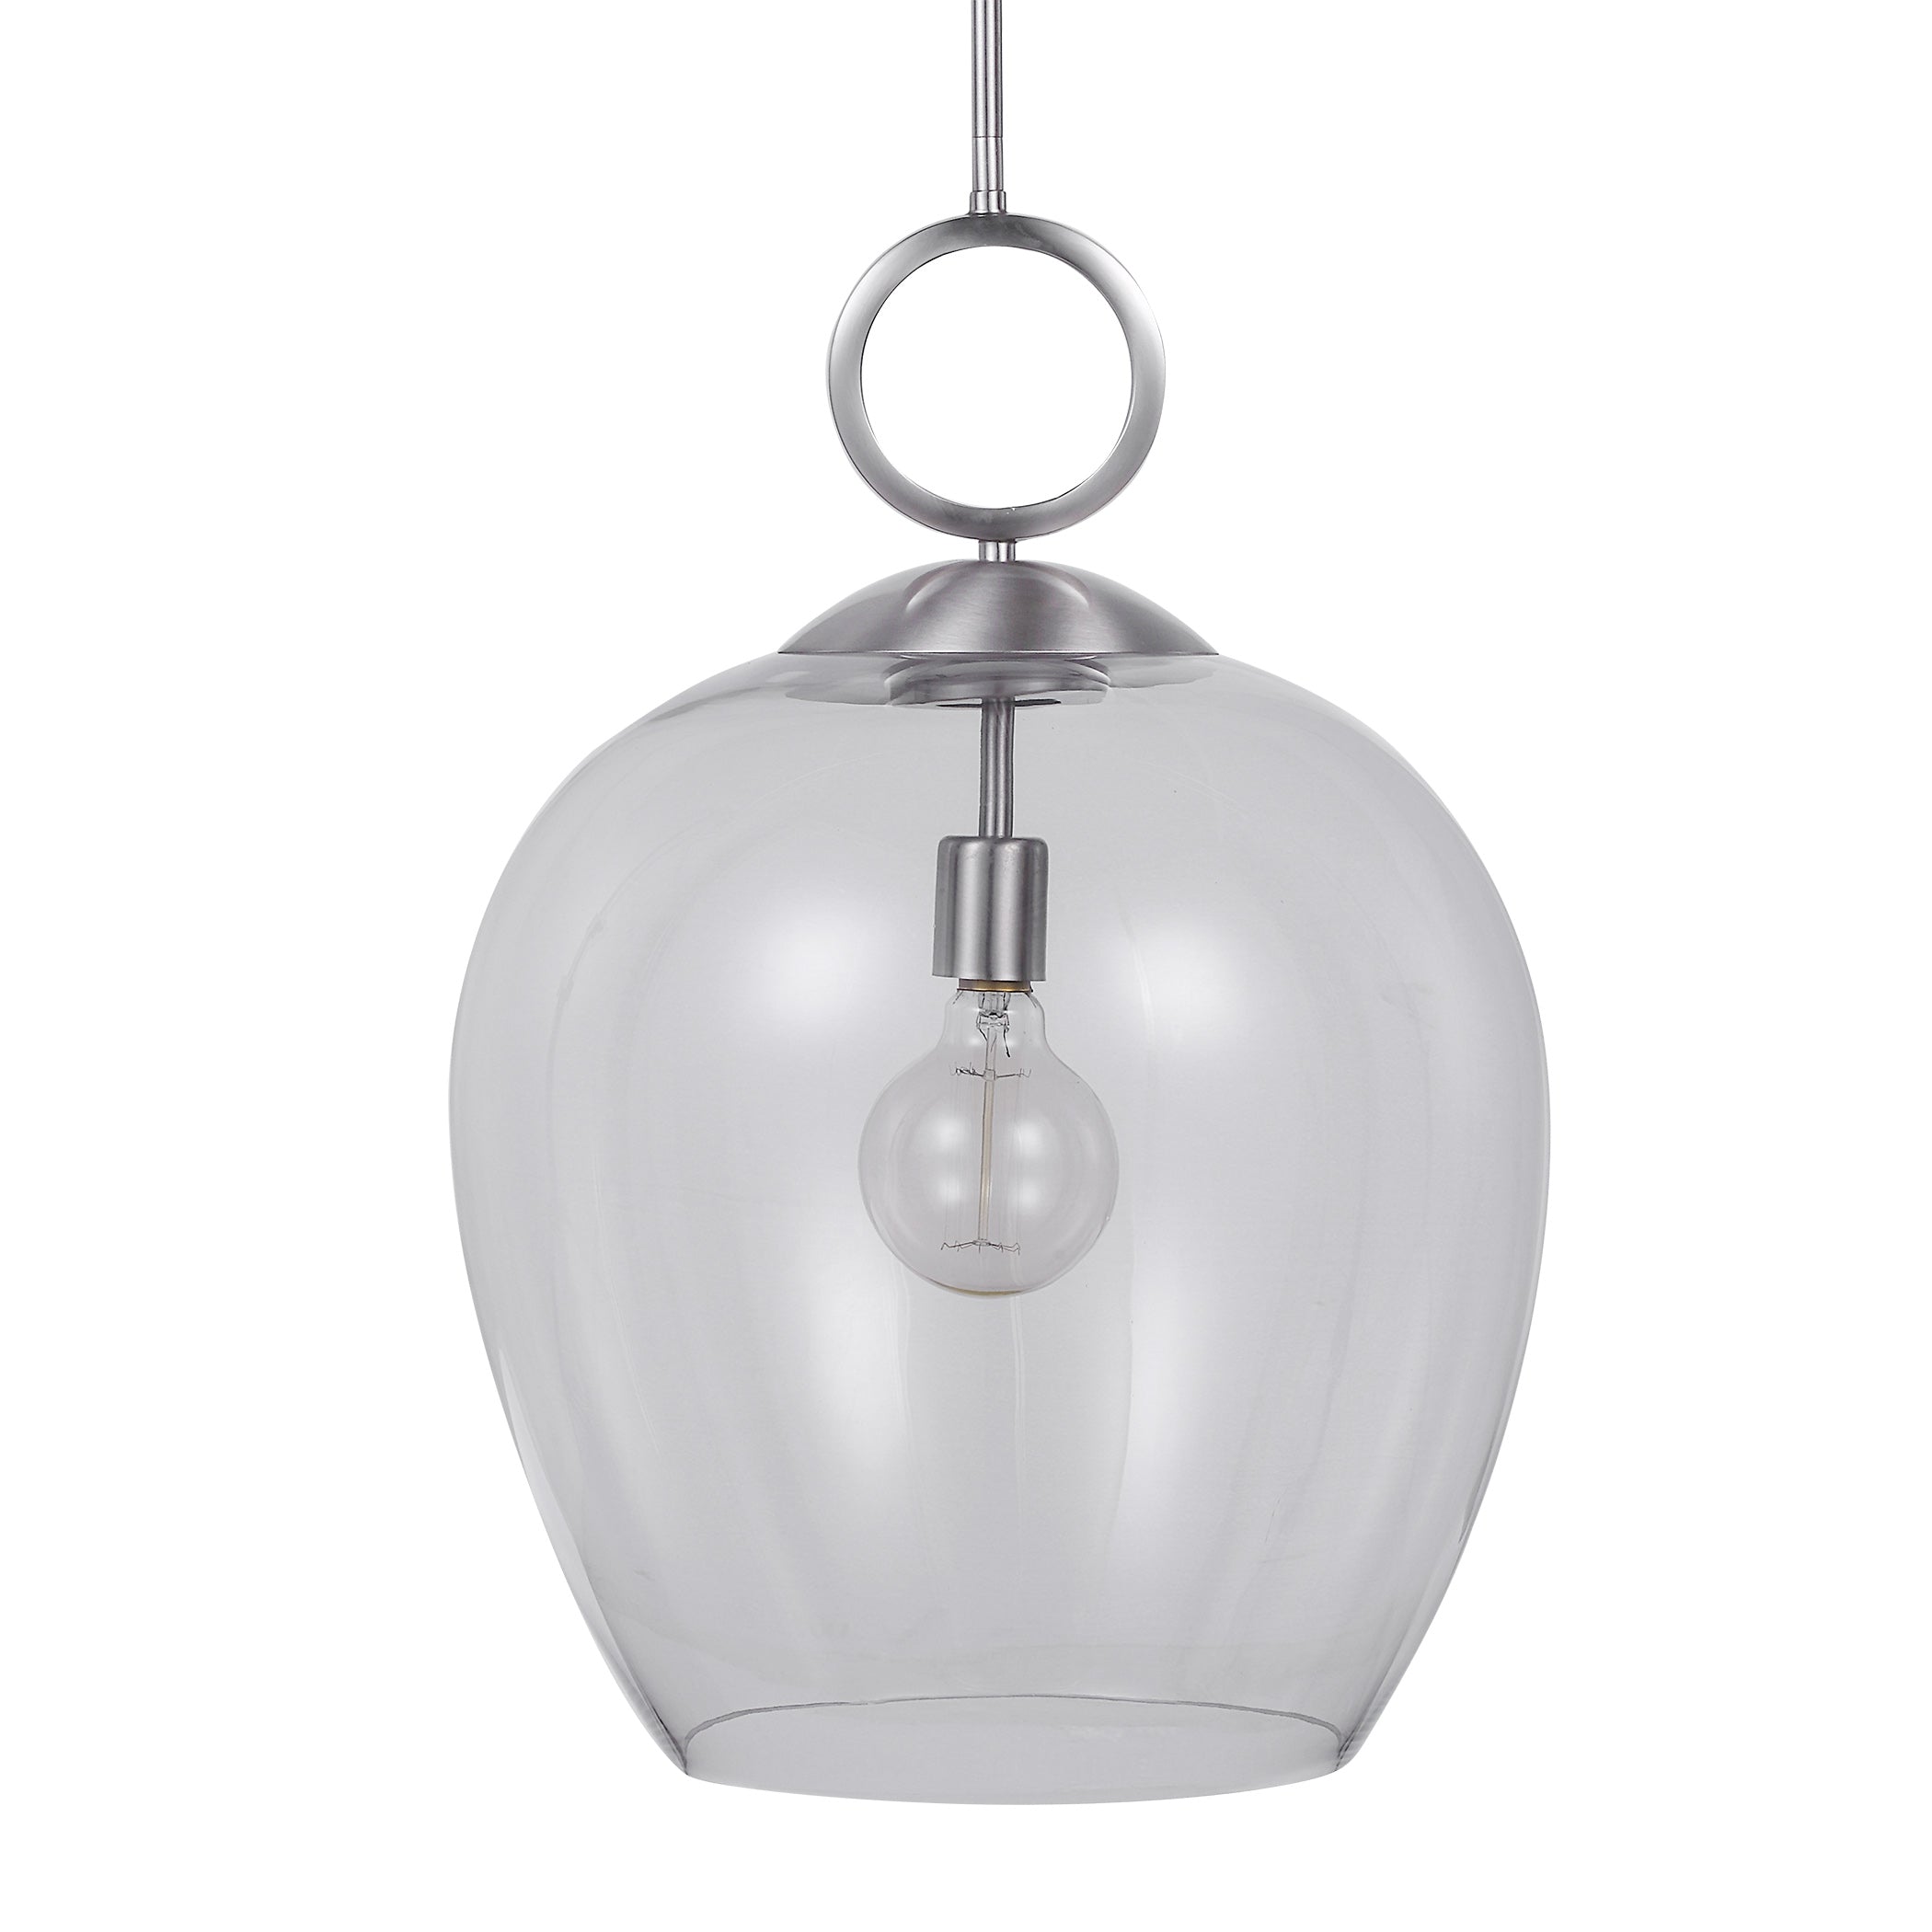 the-official-site-of-official-uttermost-22169-calix-nickel-1-light-glass-pendant-on-sale_6.jpg